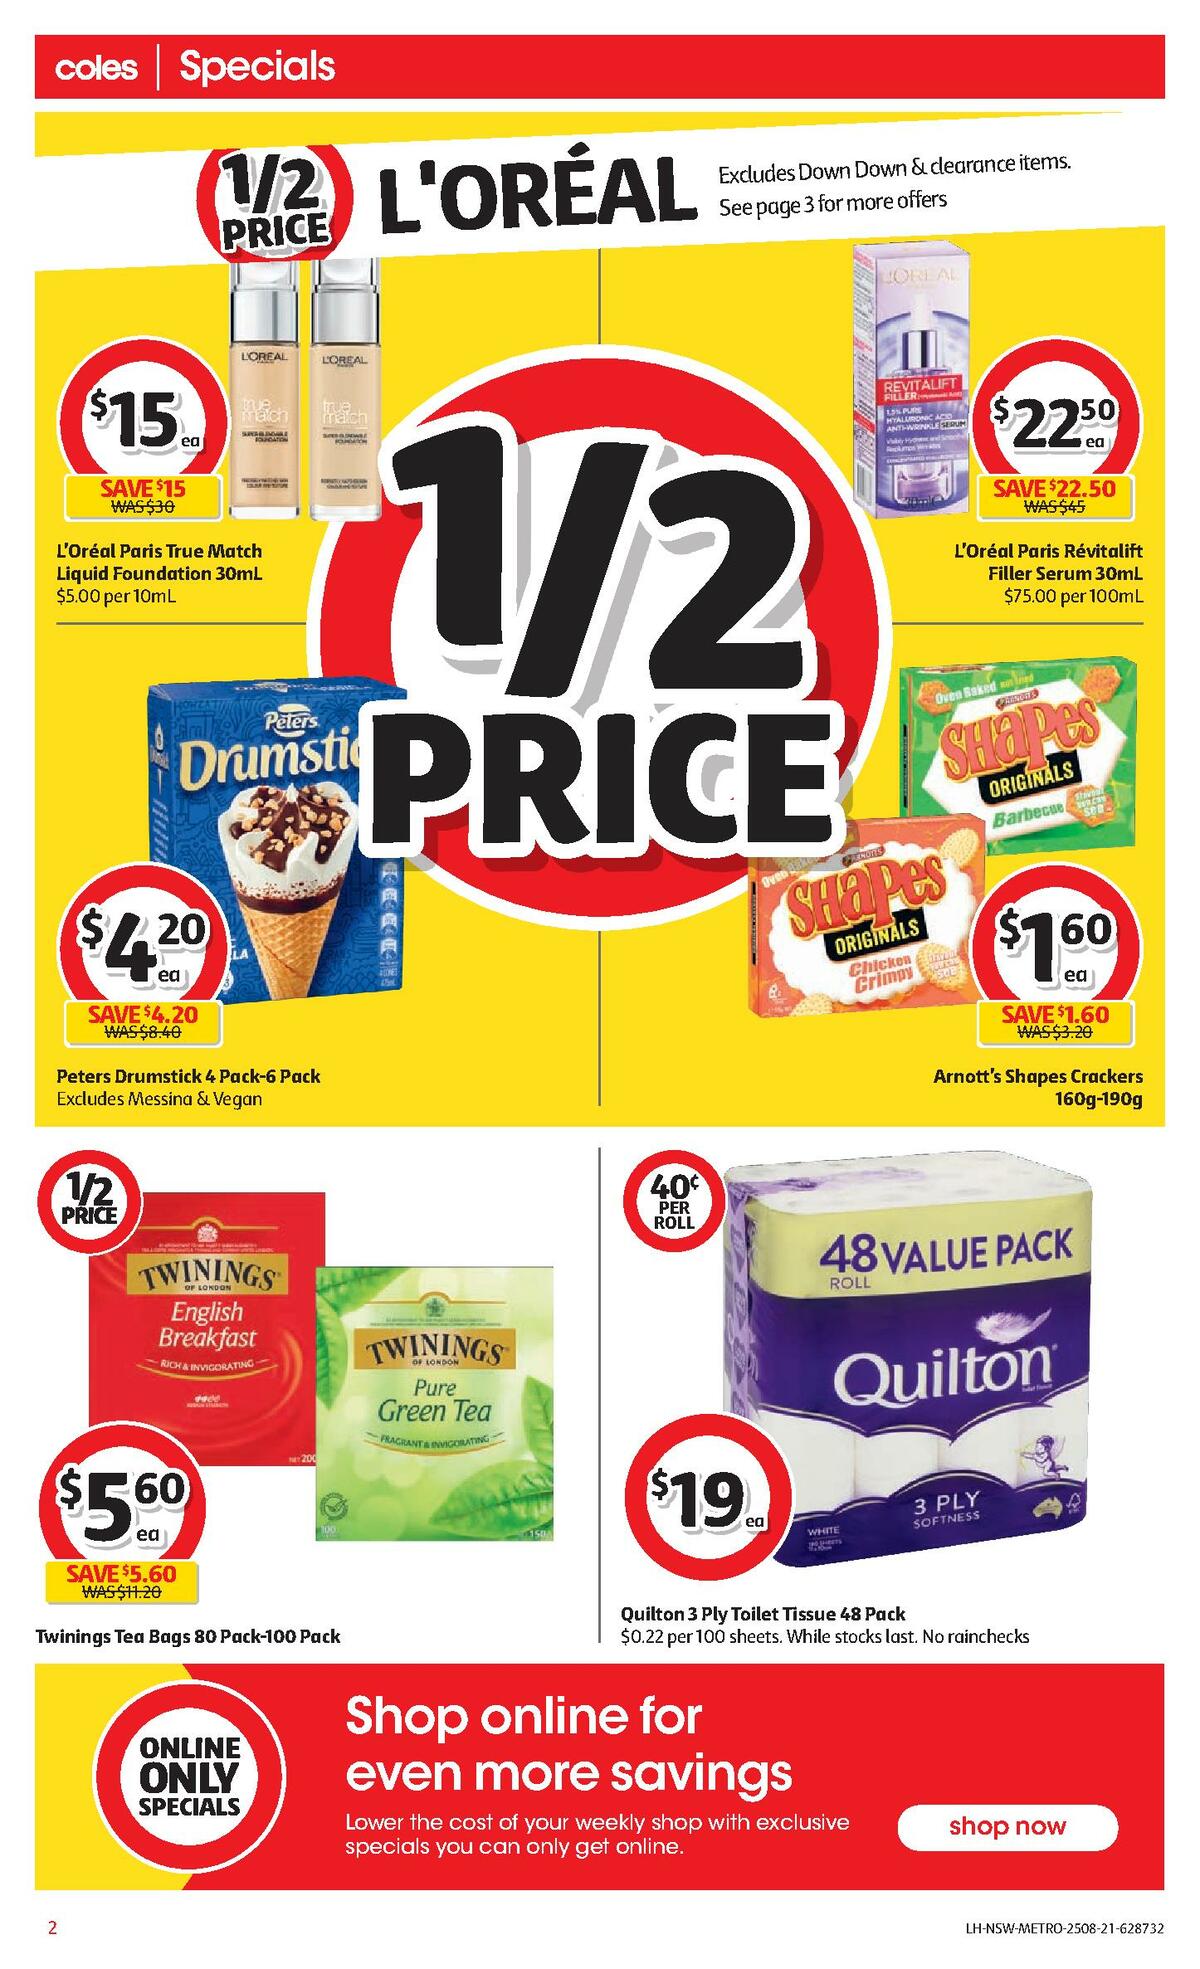 Coles Catalogues from 25 August